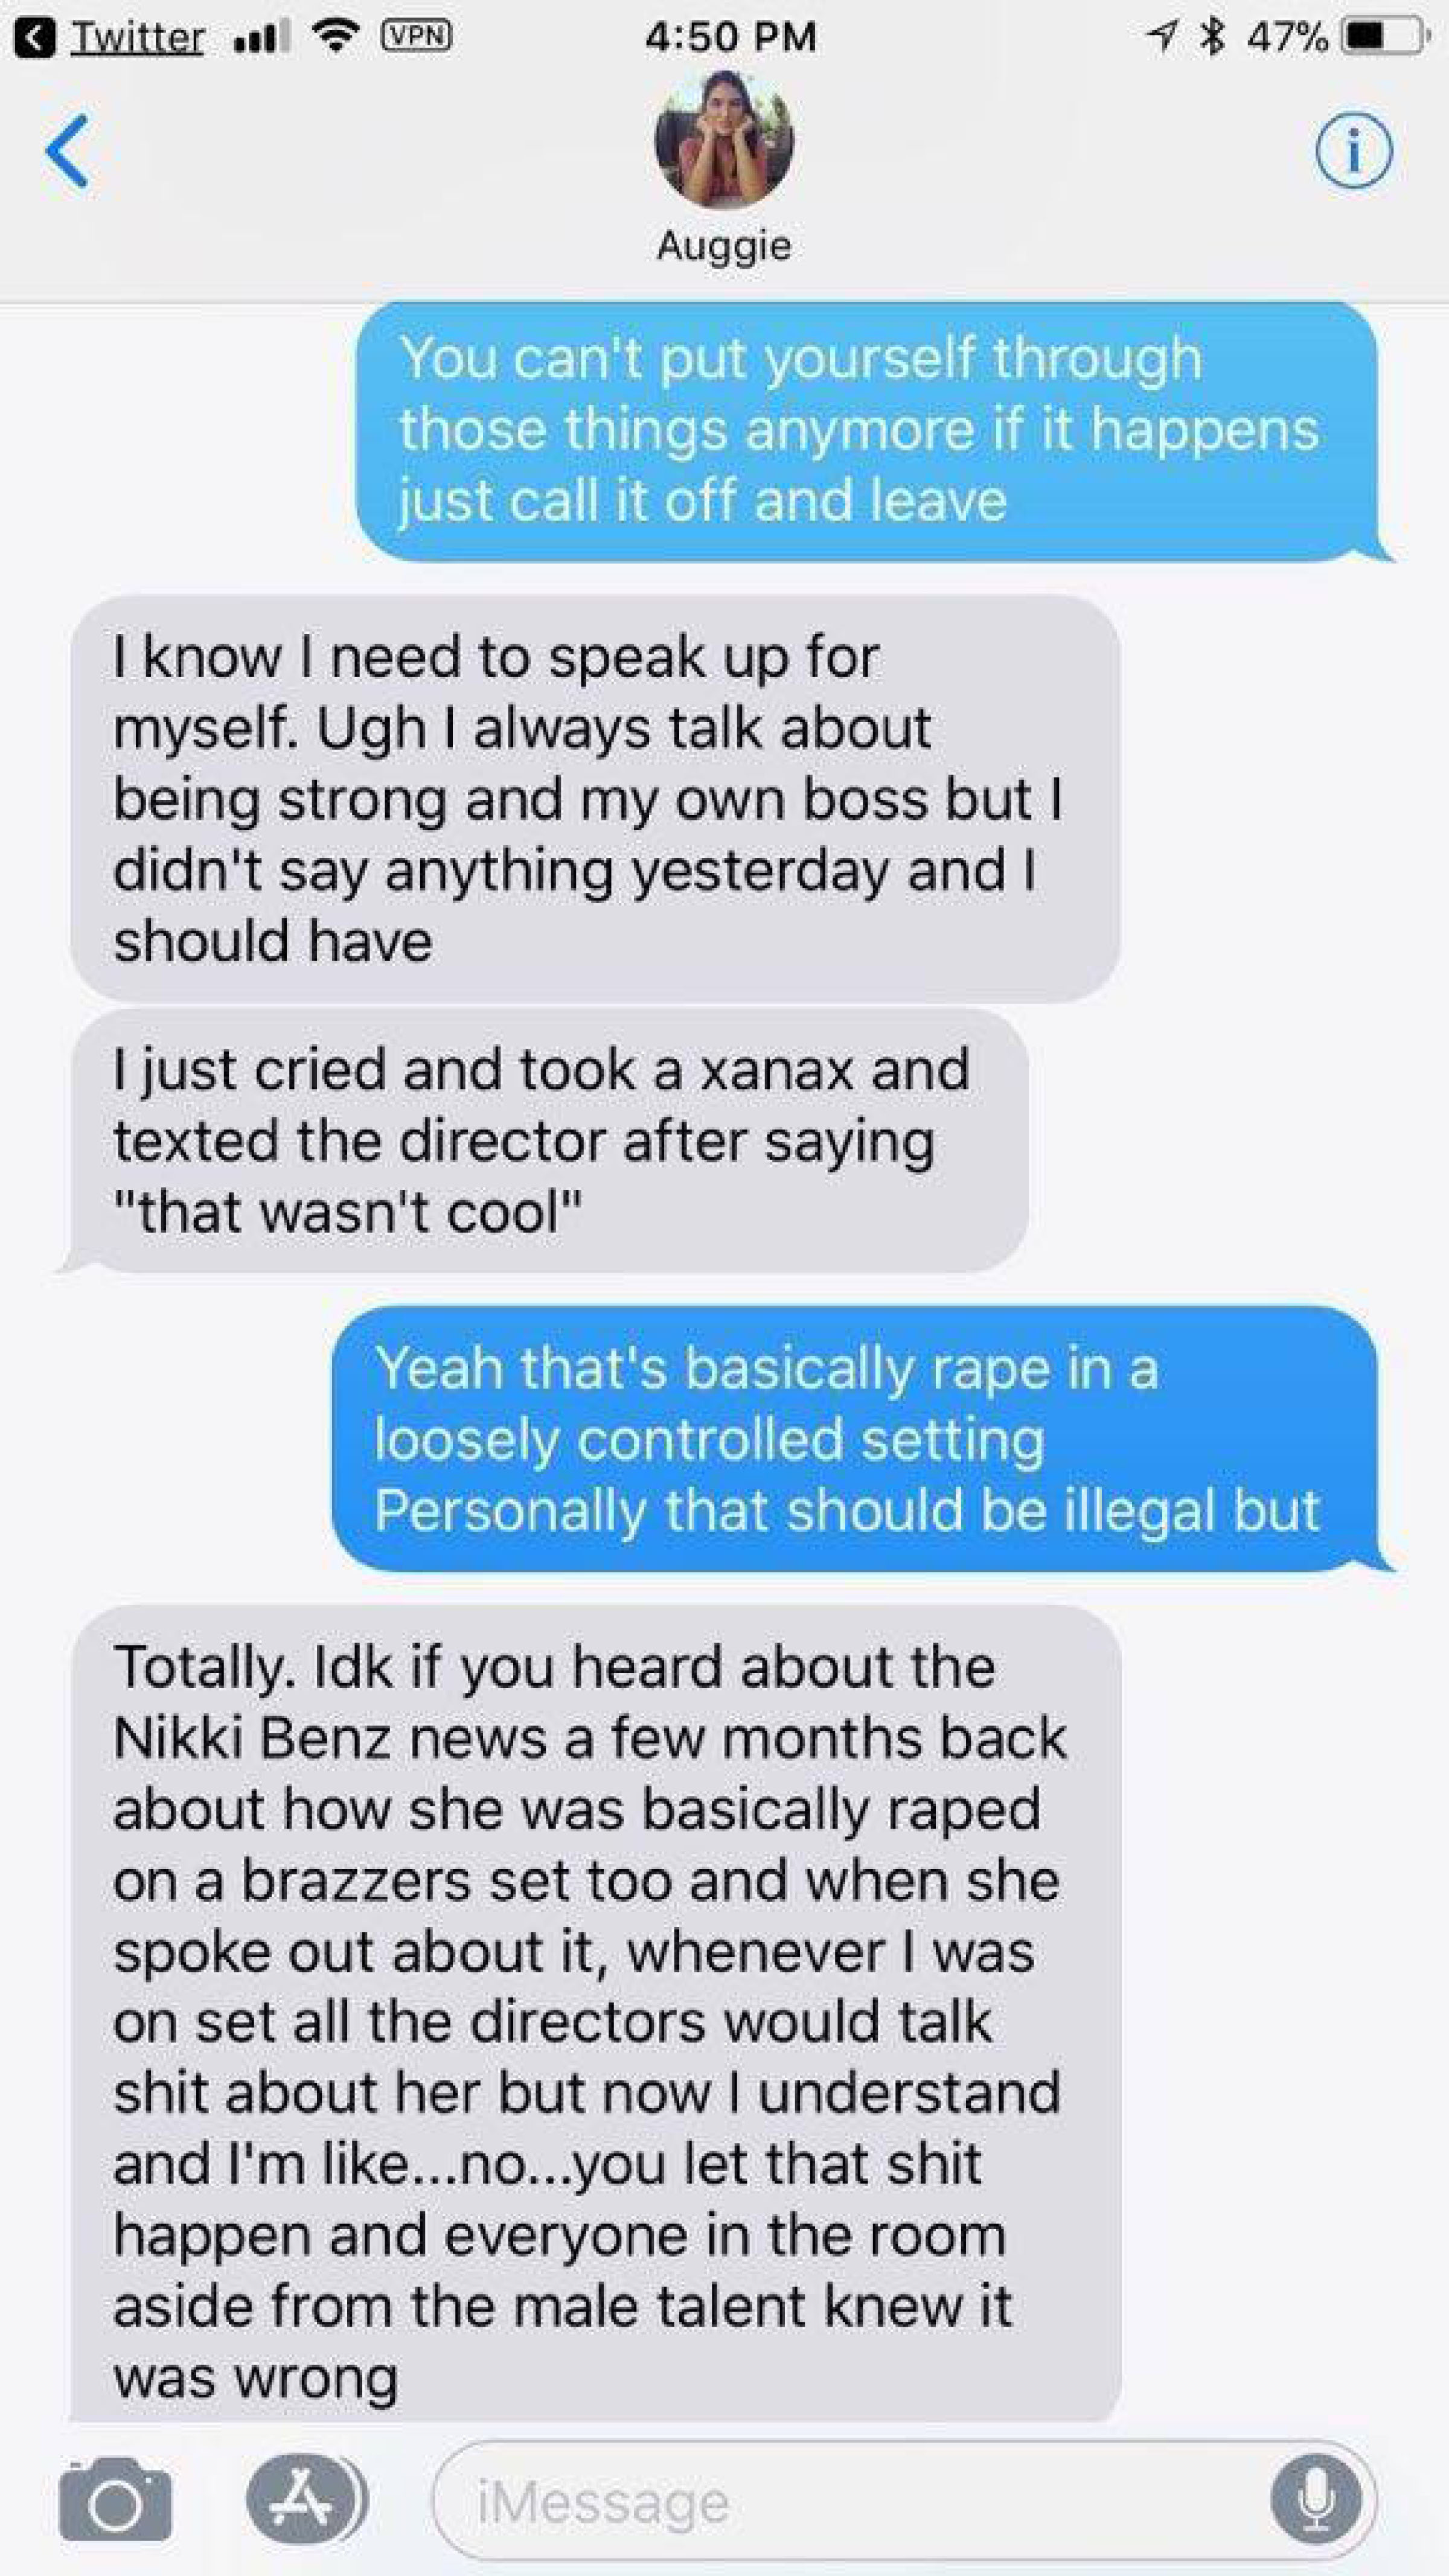 August Ames Markus Dupree - August Ames DMs/Pictures Accusing Markus Dupree Of Rape - TRPWL